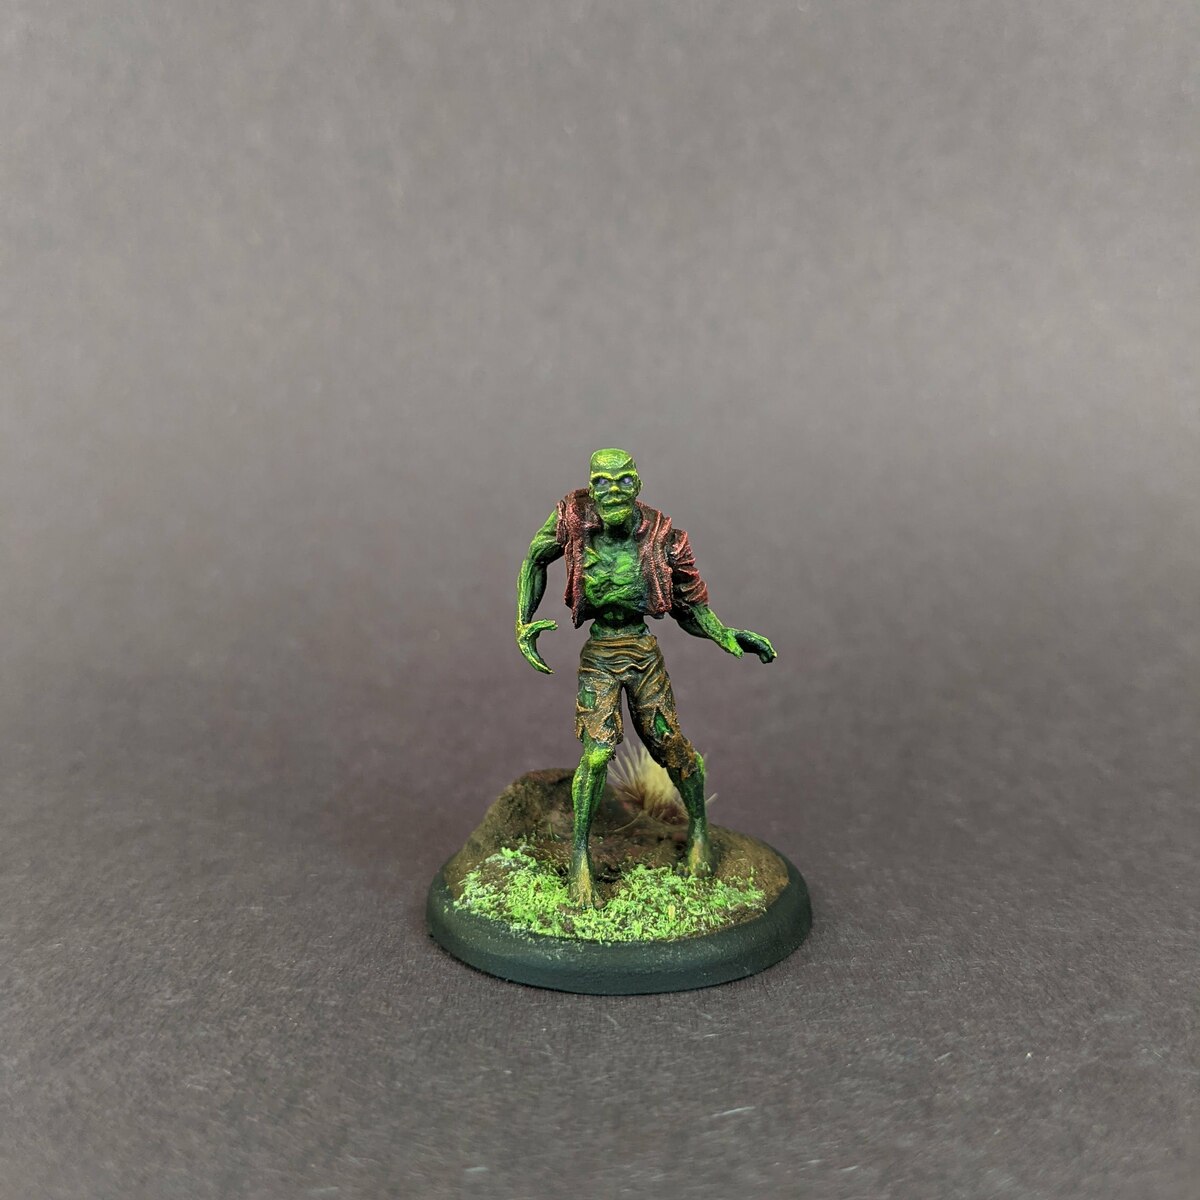 WizKids Zombie for r/minipainting fall competition